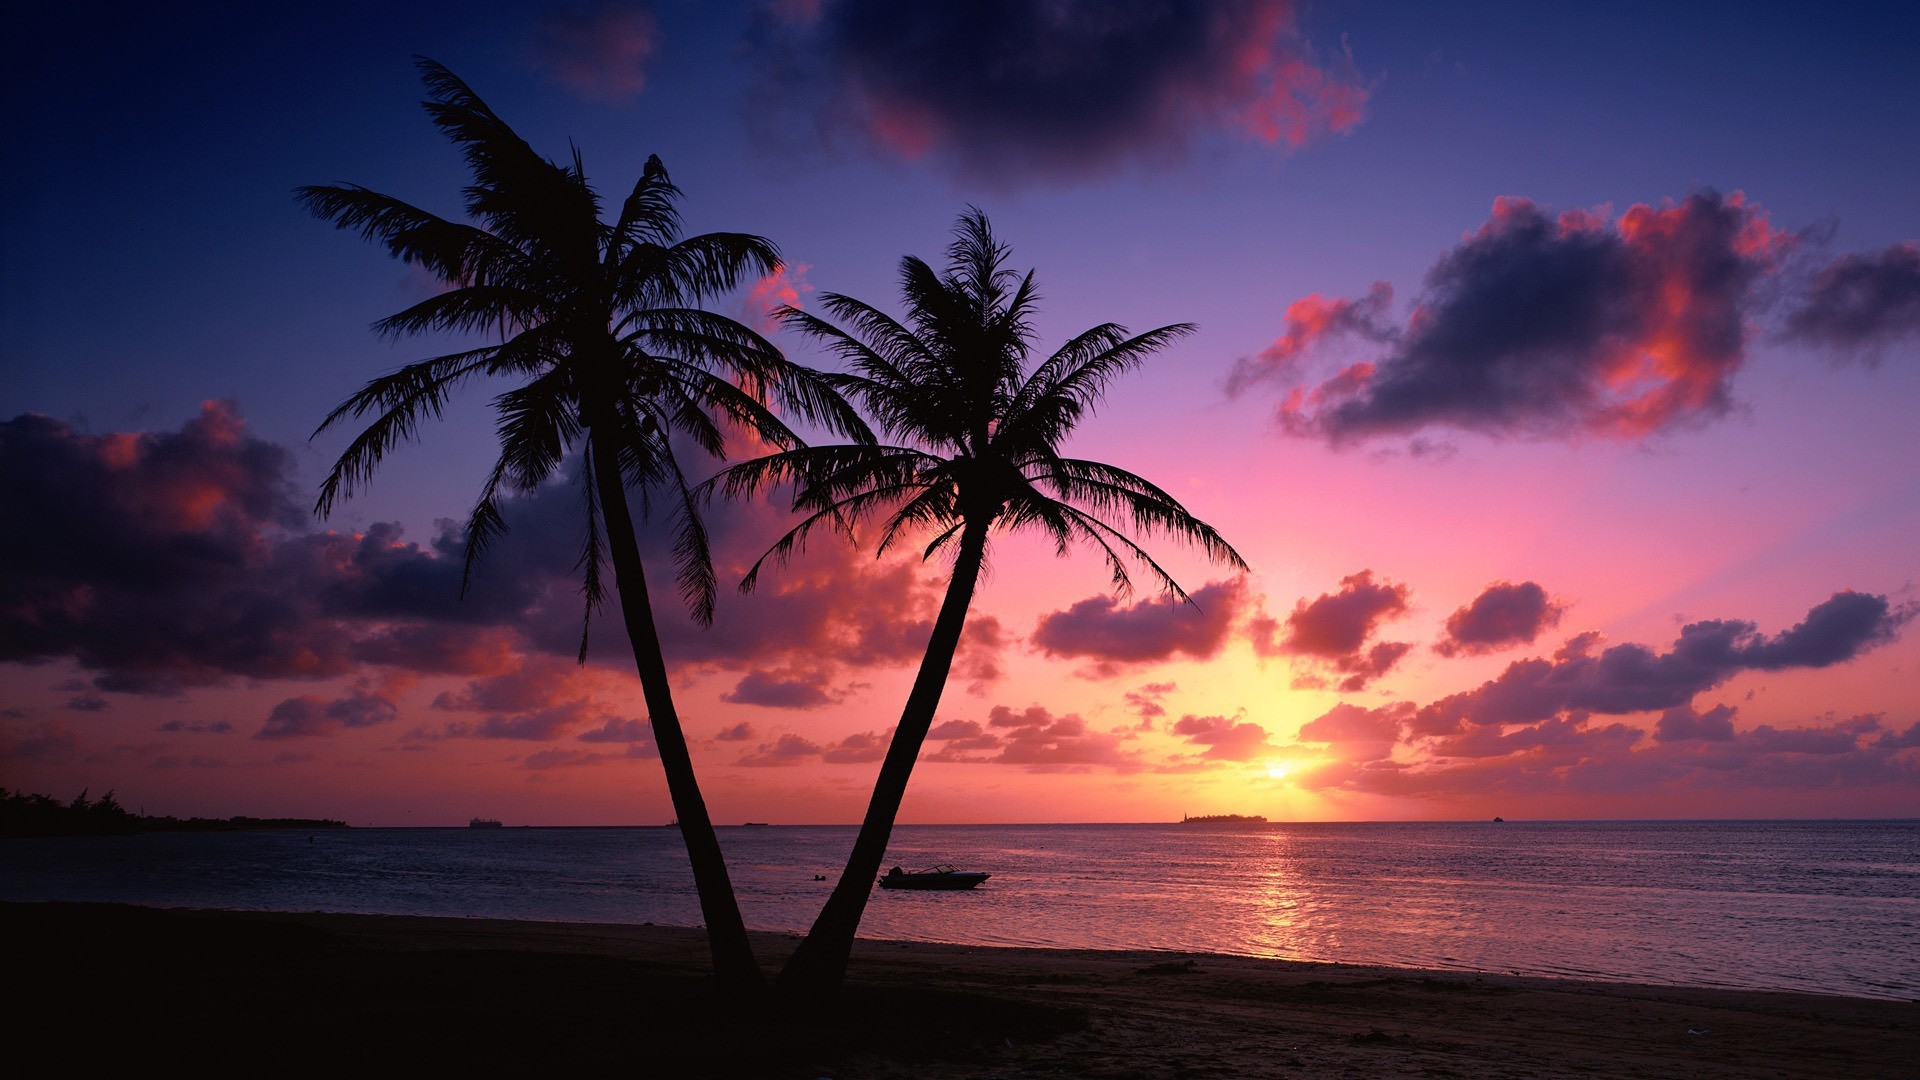 1920x1080 Beach Sunset With Palm Trees